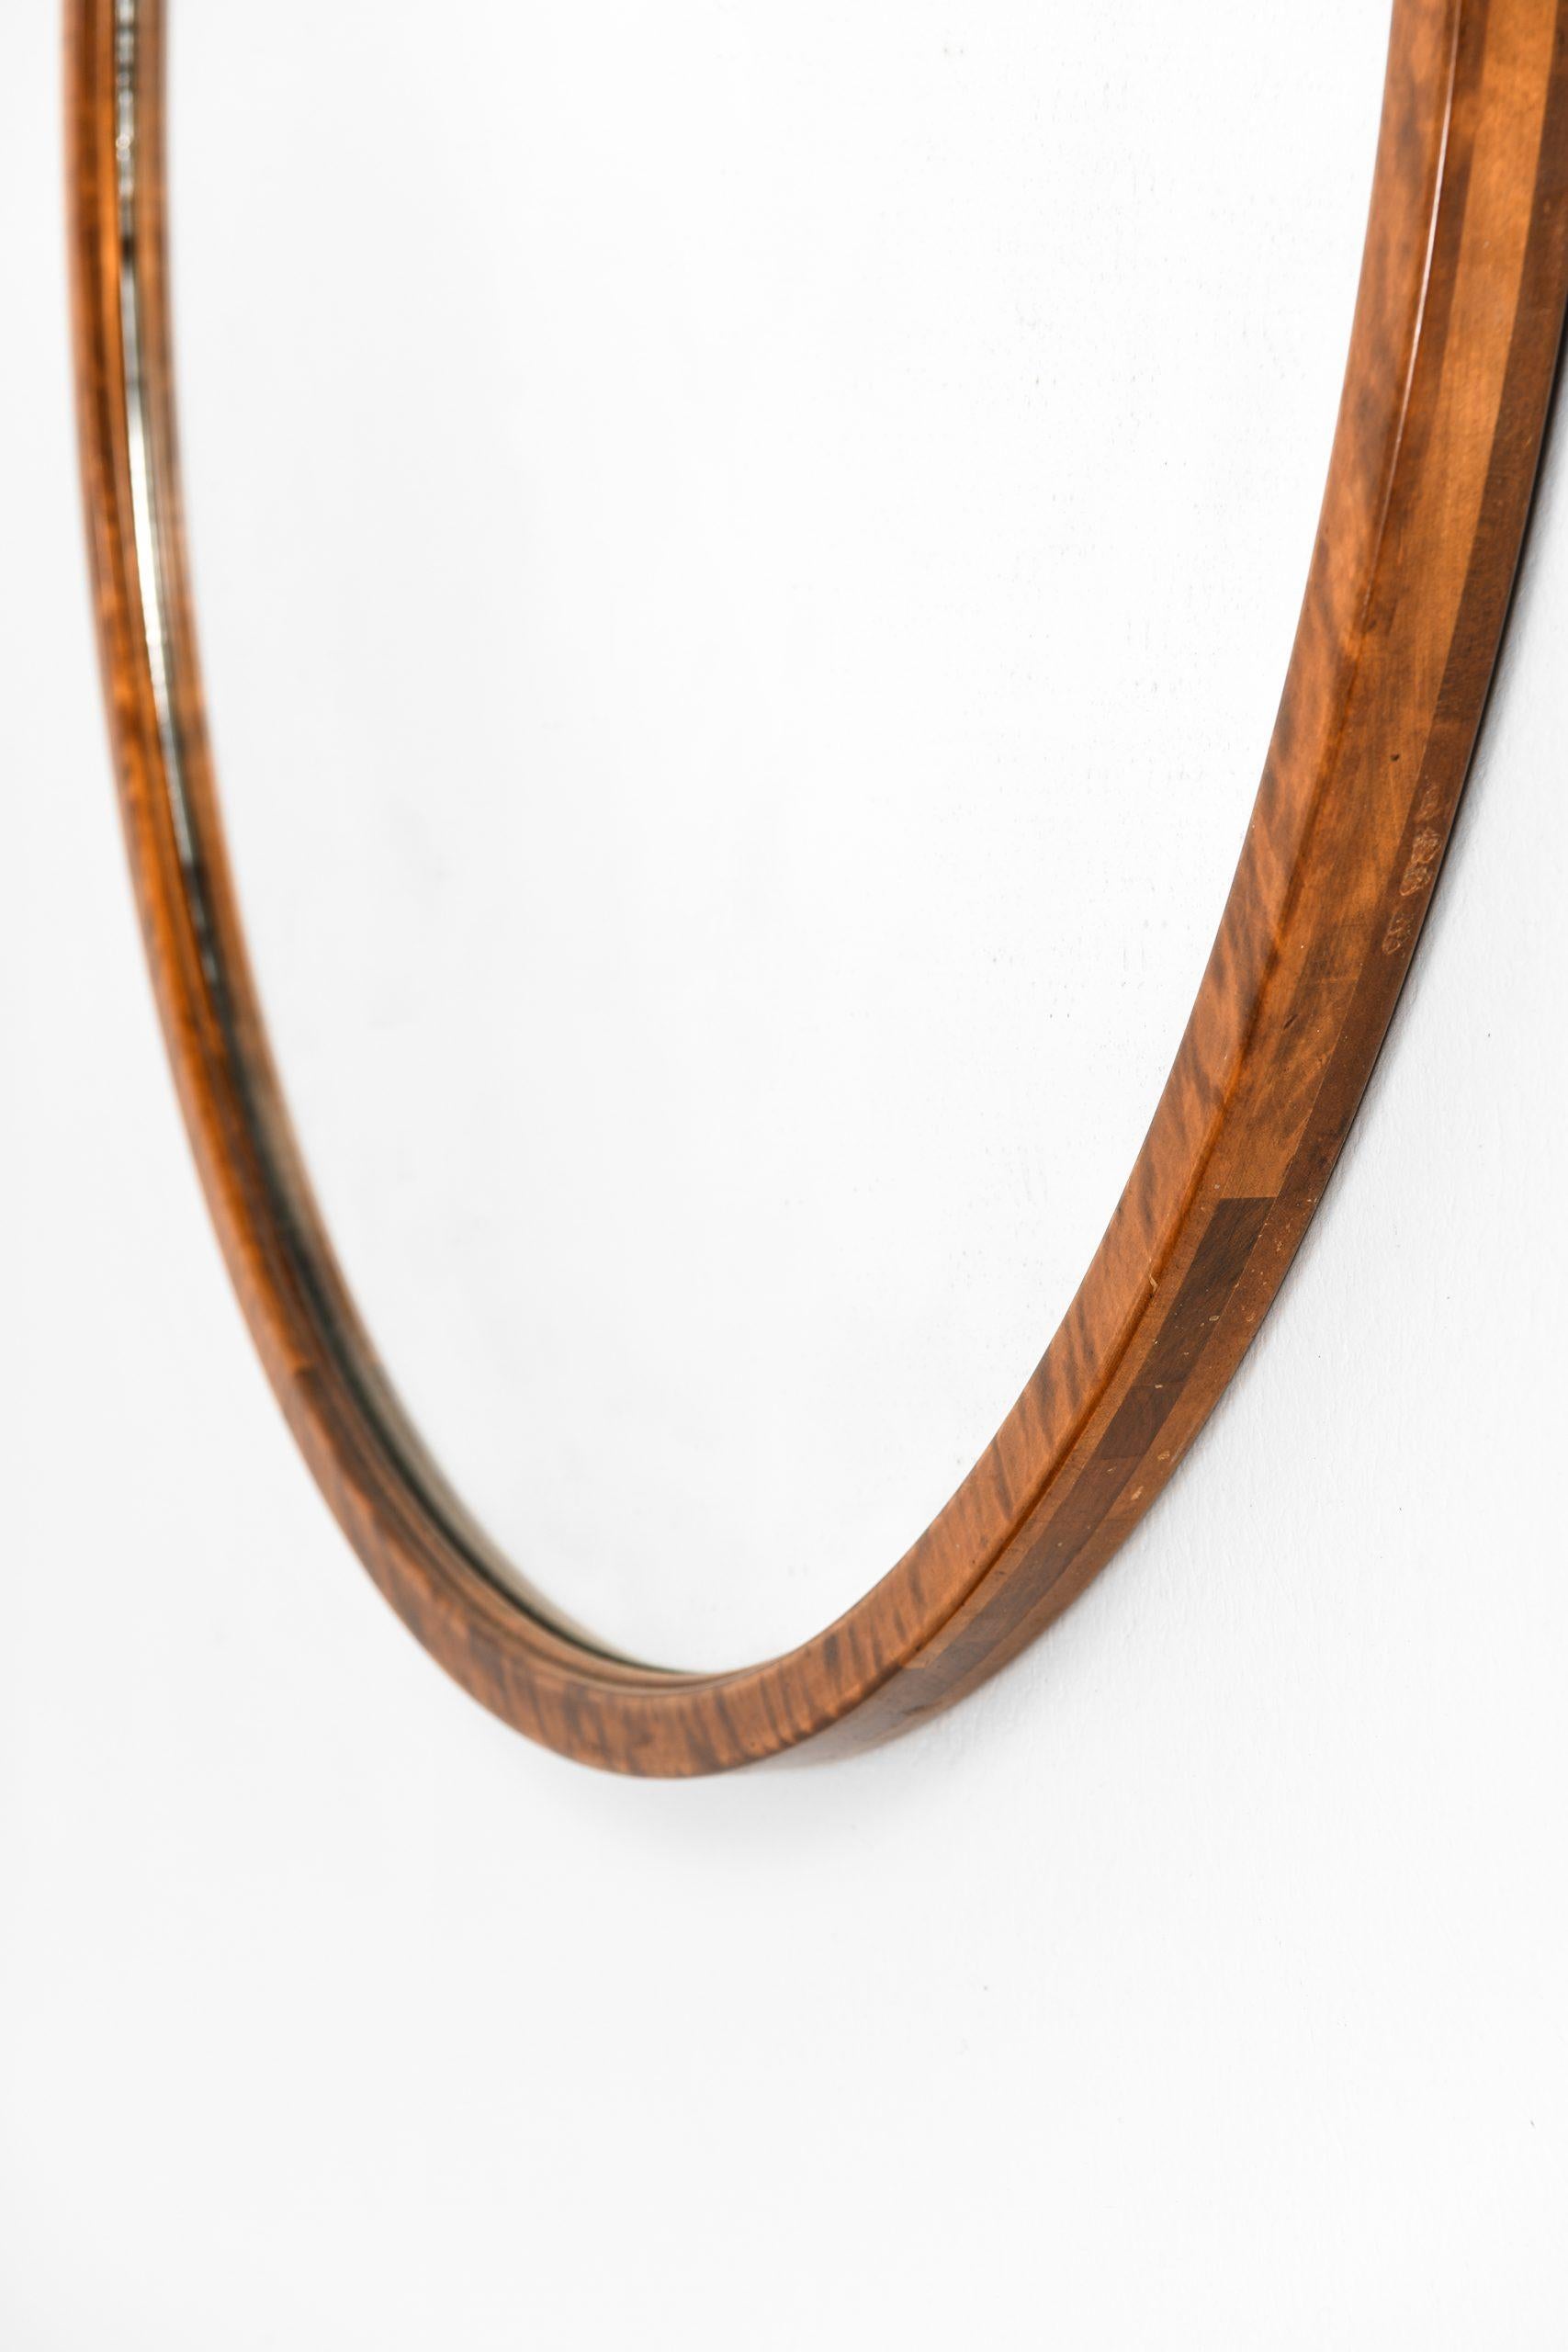 Scandinavian Modern Mirror Attributed to Axel Einar Hjorth Produced by Bodabors in Sweden